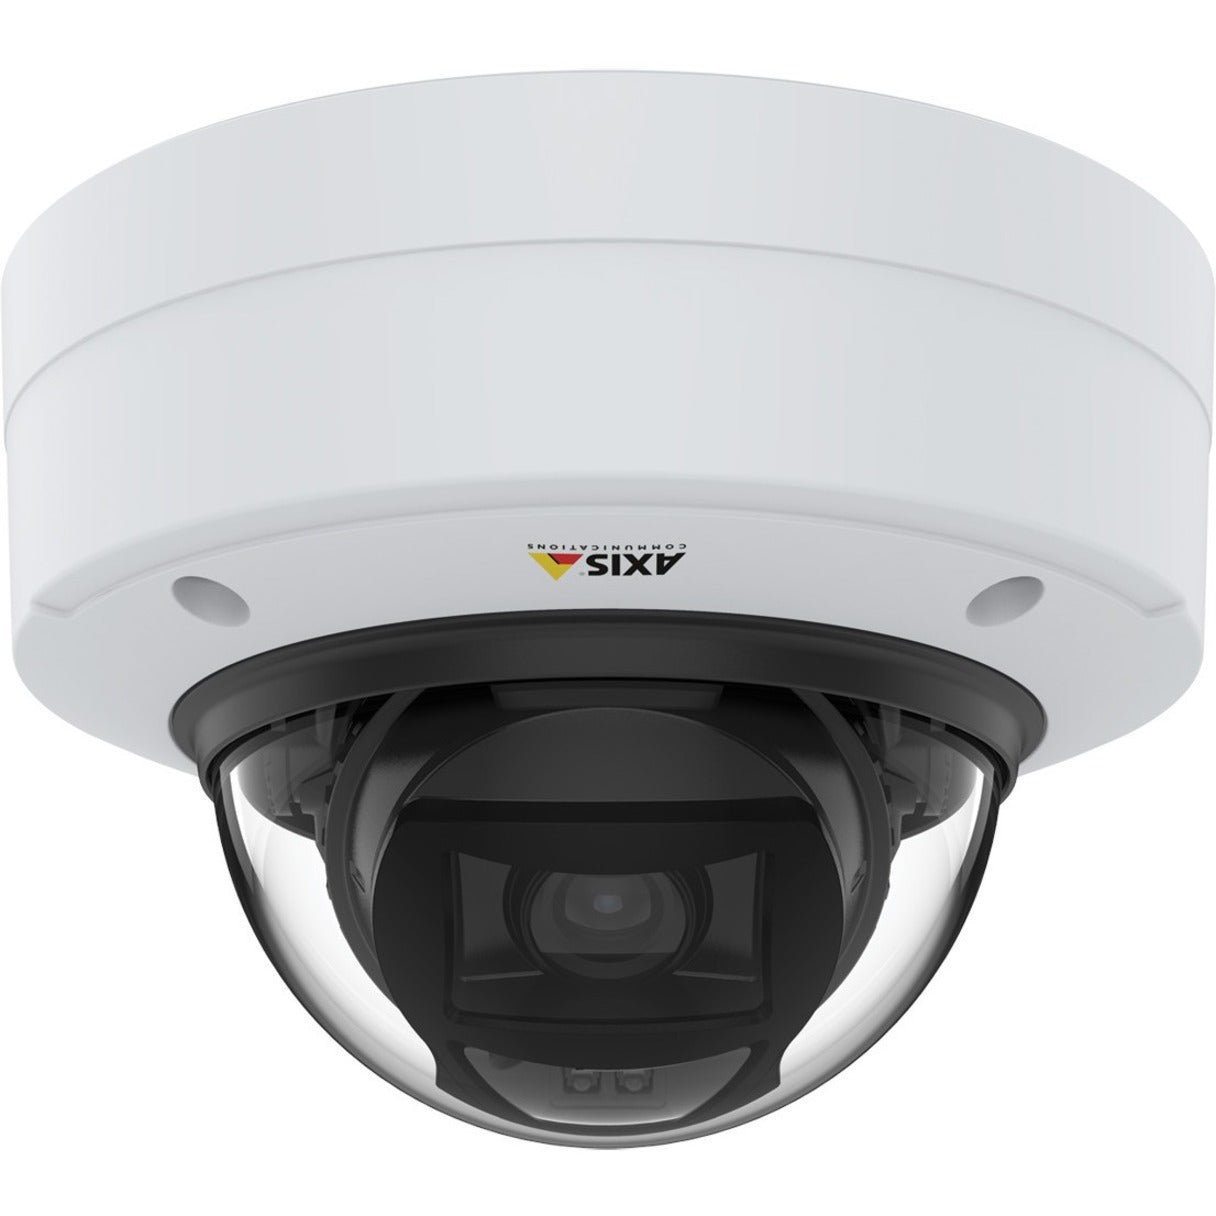 AXIS 02047-001 P3245-LVE Network Camera, Outdoor Full HD Dome, TAA Compliant